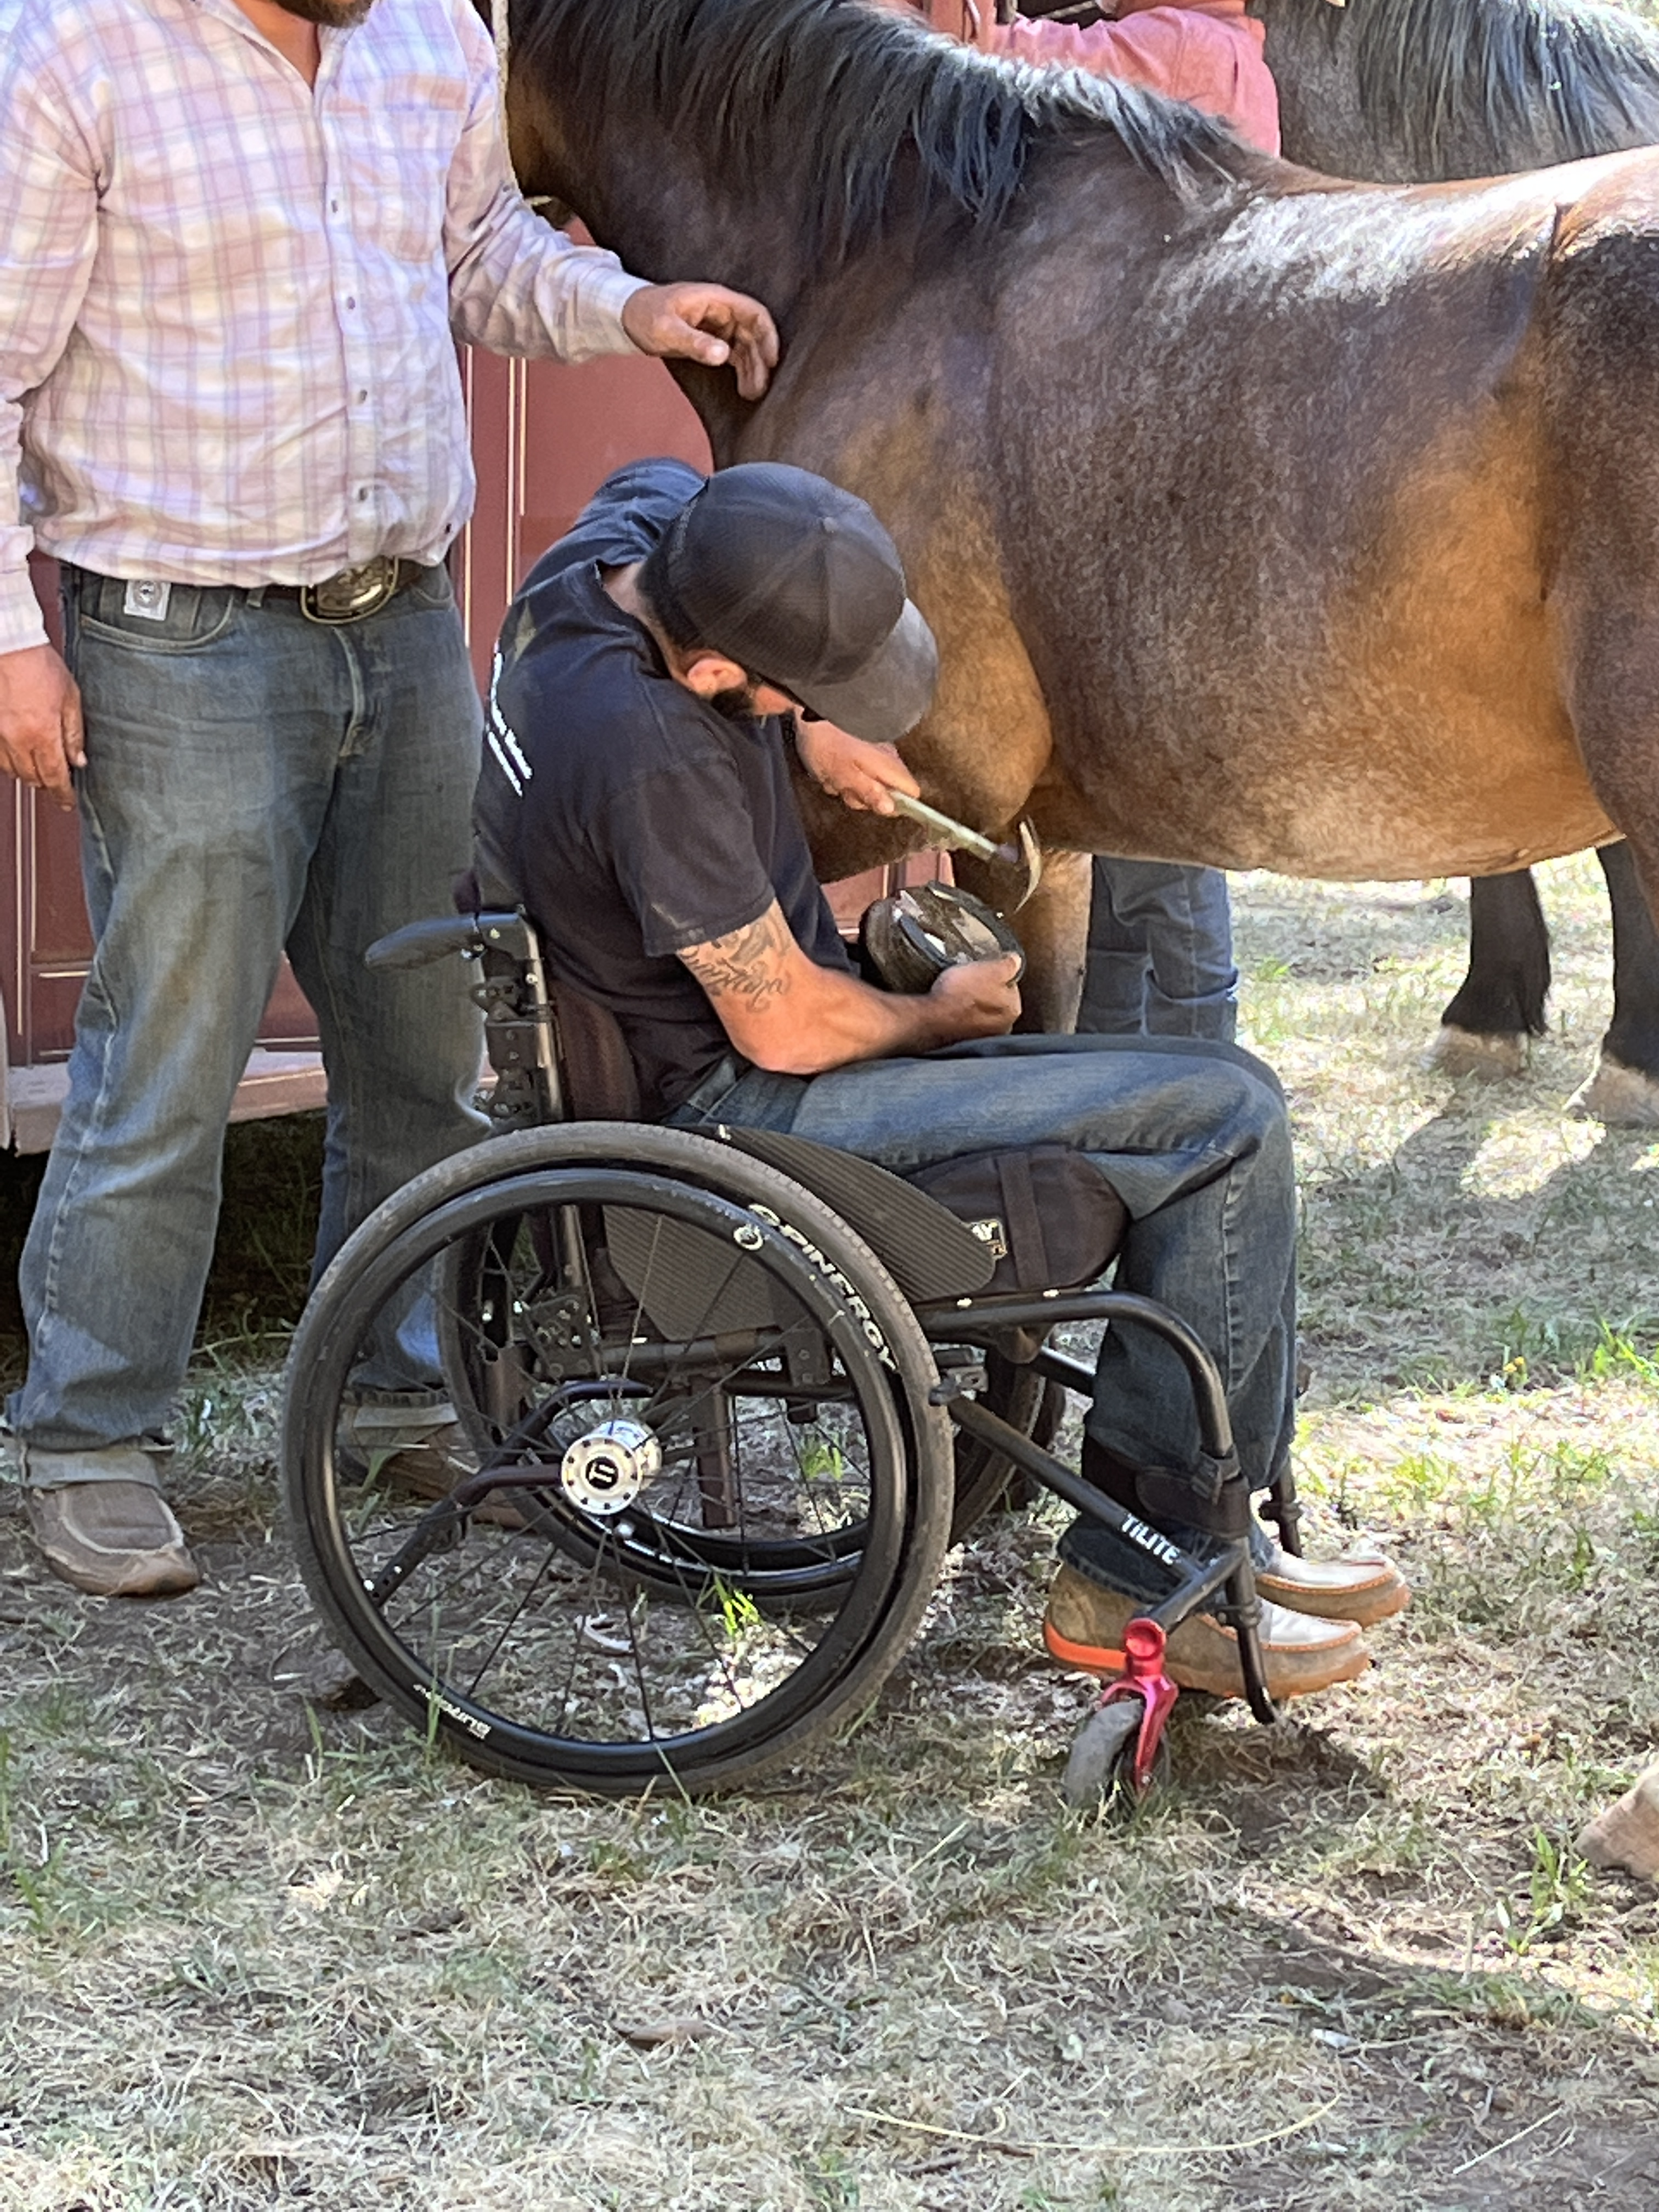 two men shoe a grey horse, 1 sits in a wheelchair